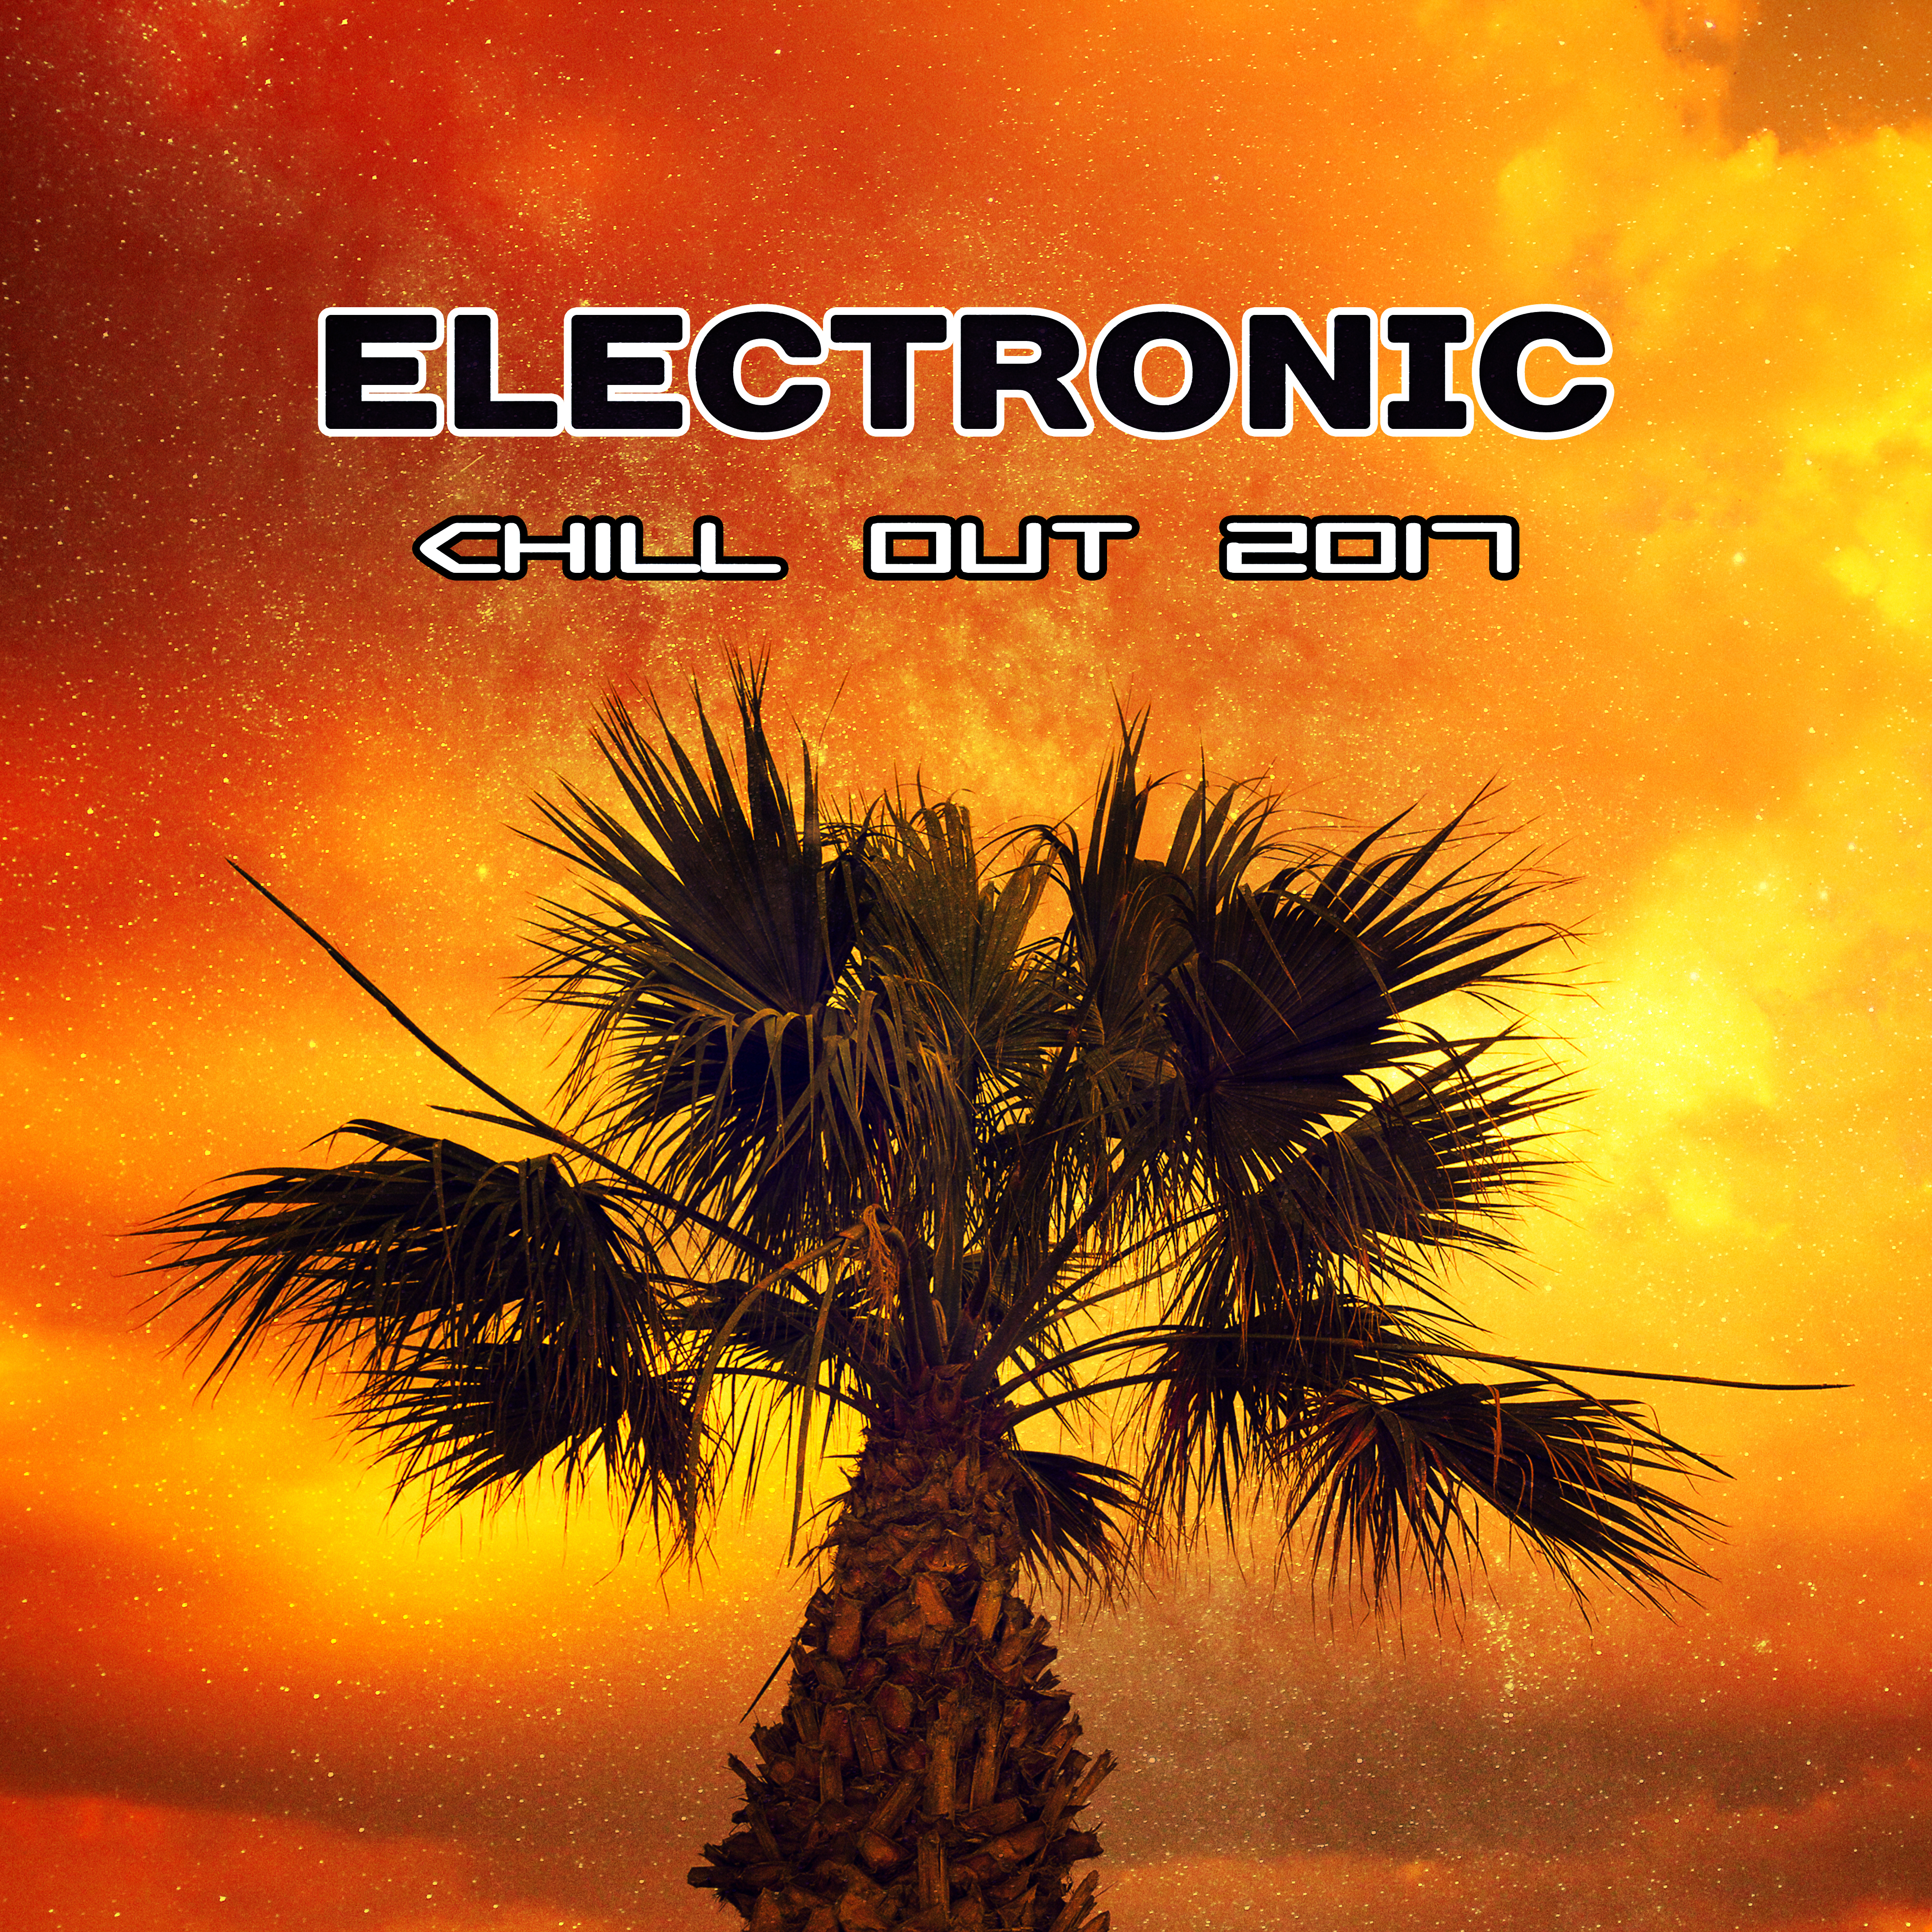 Electronic Chill Out 2017 – Deep Chill Out Vibes, Ibiza Poolside, Summer Chill, Pure Relaxation, Relax on the Beach